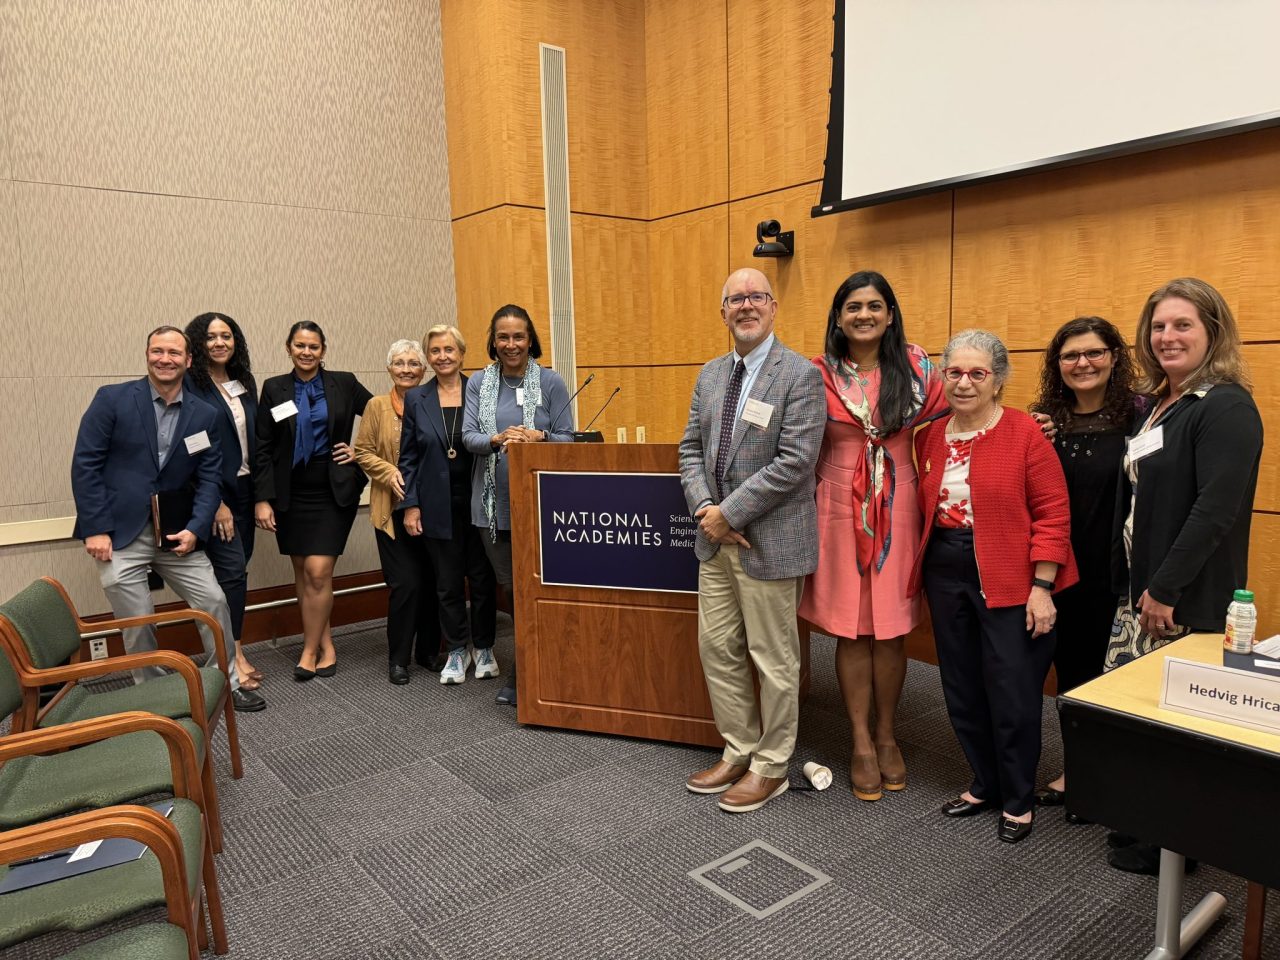 Ishwaria Subbiah: And that’s a wrap! Cheers from your planning committee for the 2023 Workshop on Assessing and Advancing Progress in the Delivery of High-Quality Cancer Care, co-hosted by ASCO and National Cancer Policy Forum!